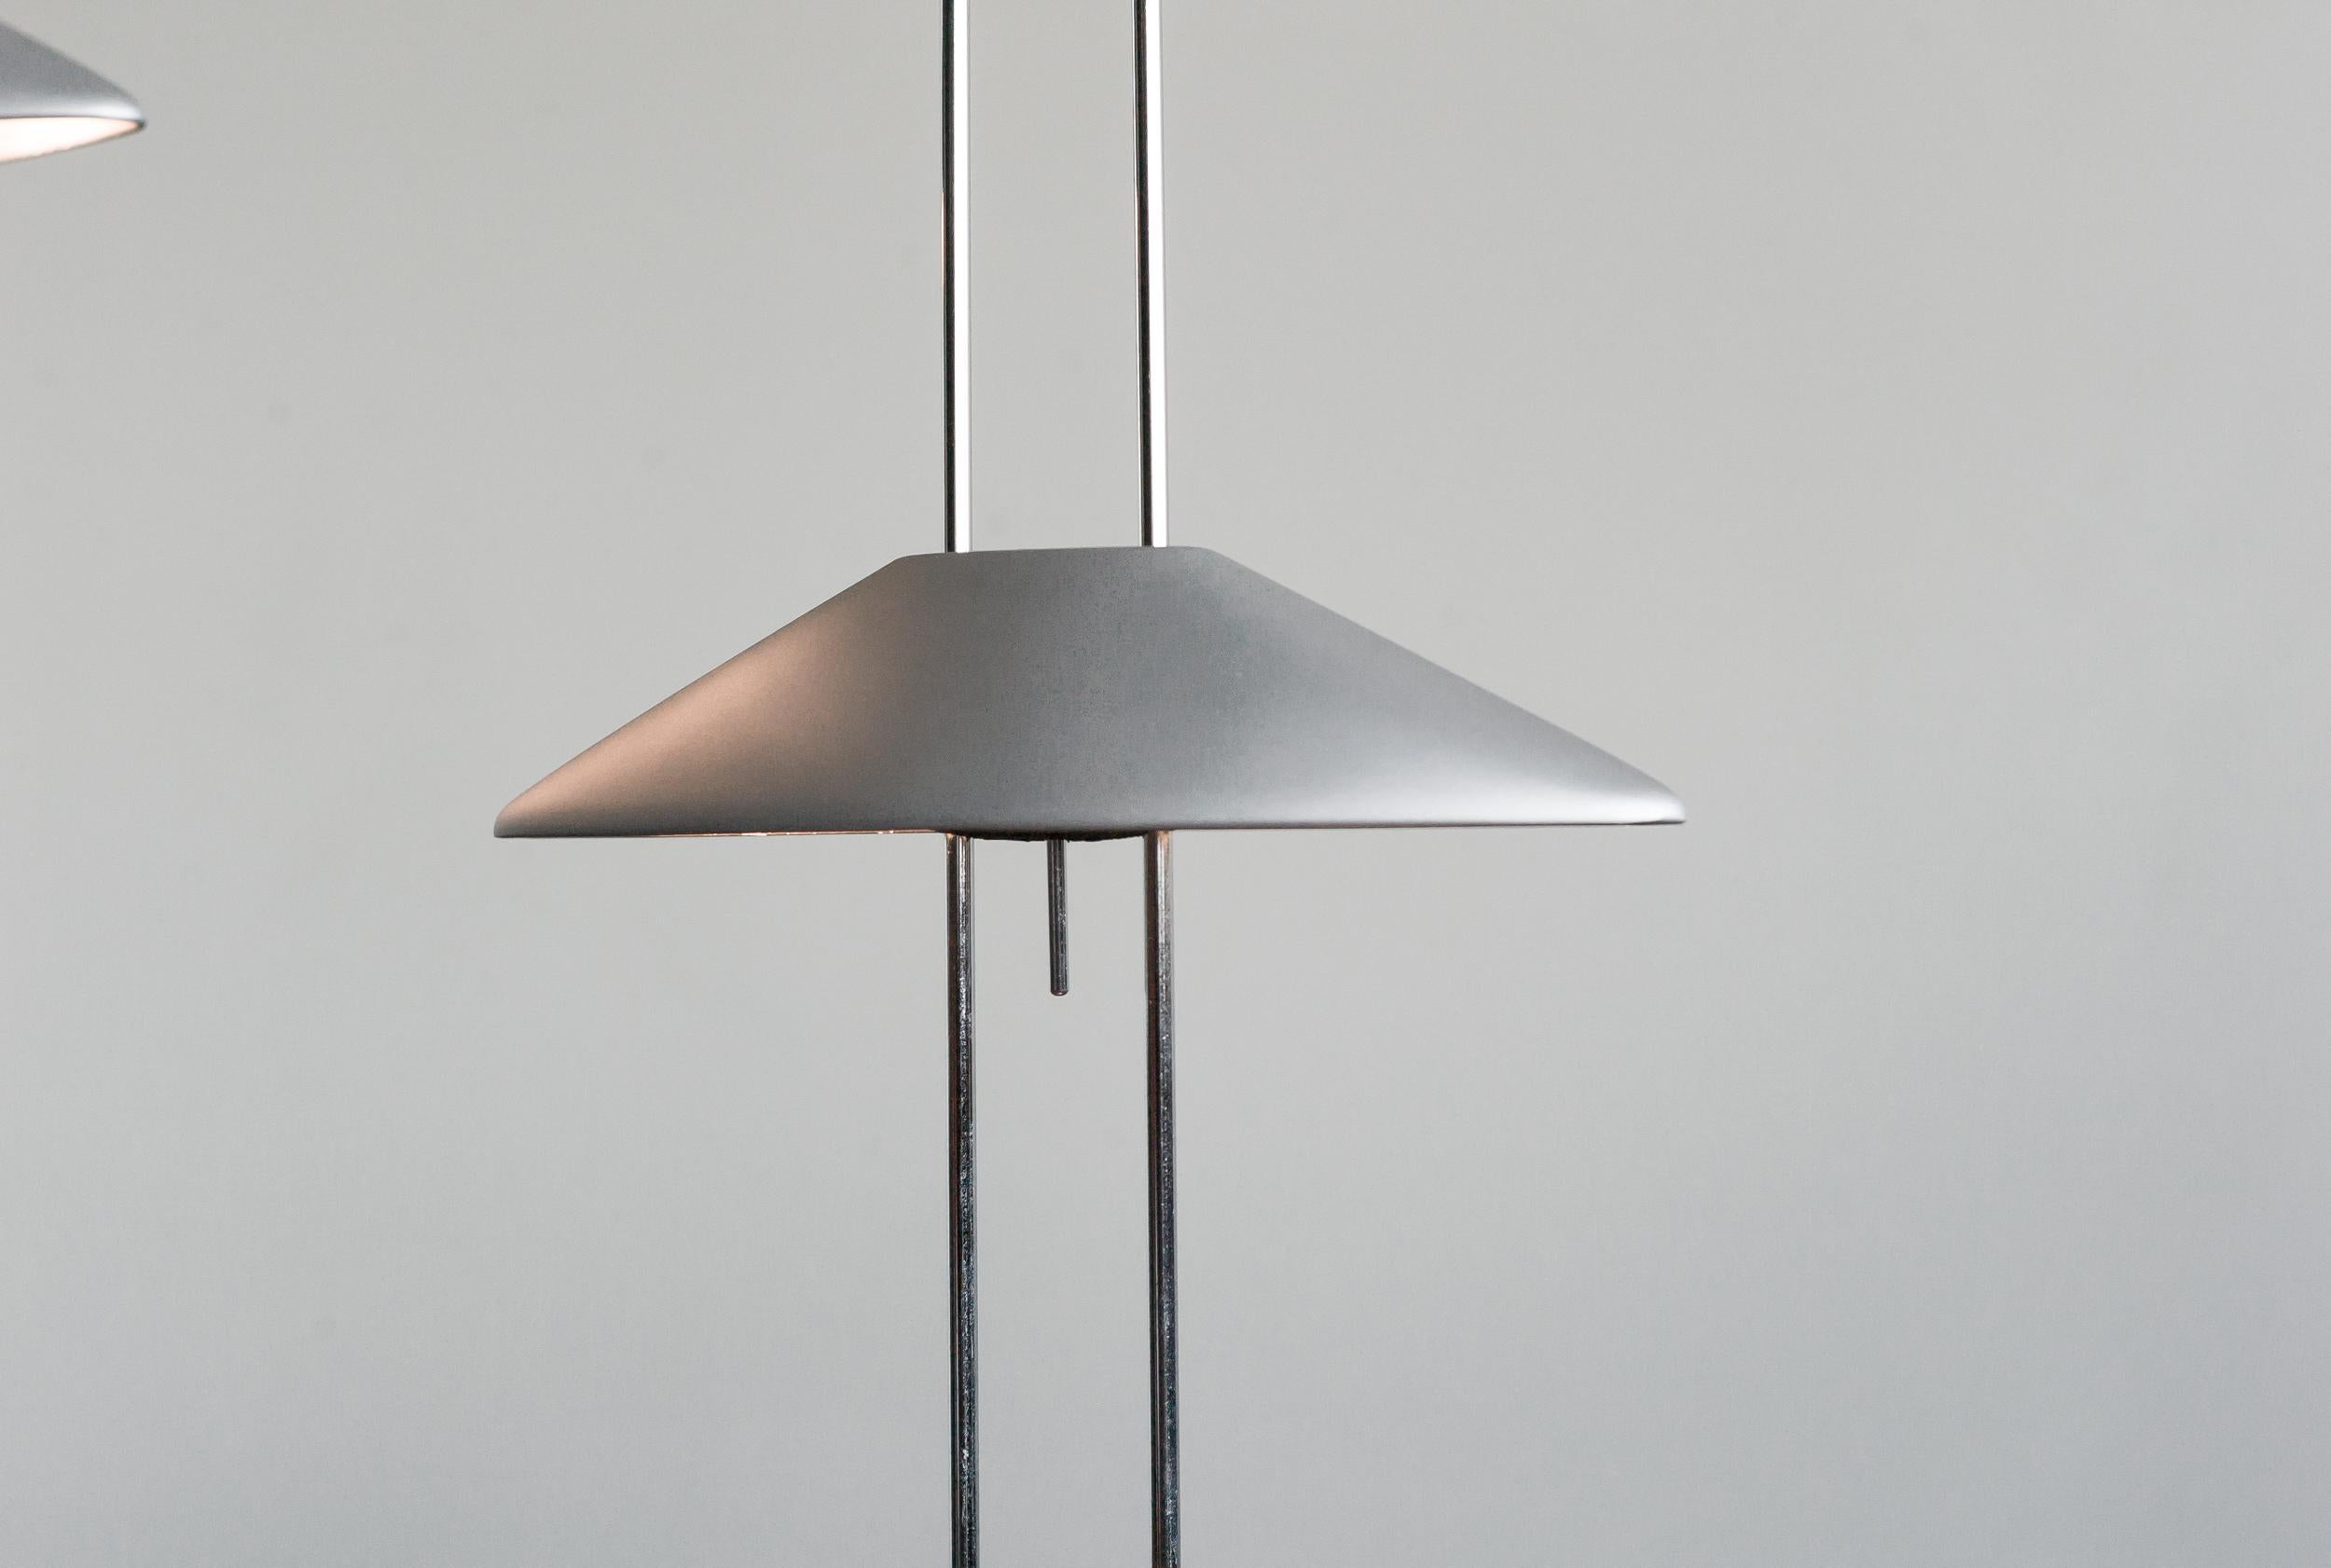 Cast aluminium desk lamps with high/low toggle switch and height adjustable shade.
Designed by Jorge Pensi for B-Lux.
Wiring suitable for use in the USA.